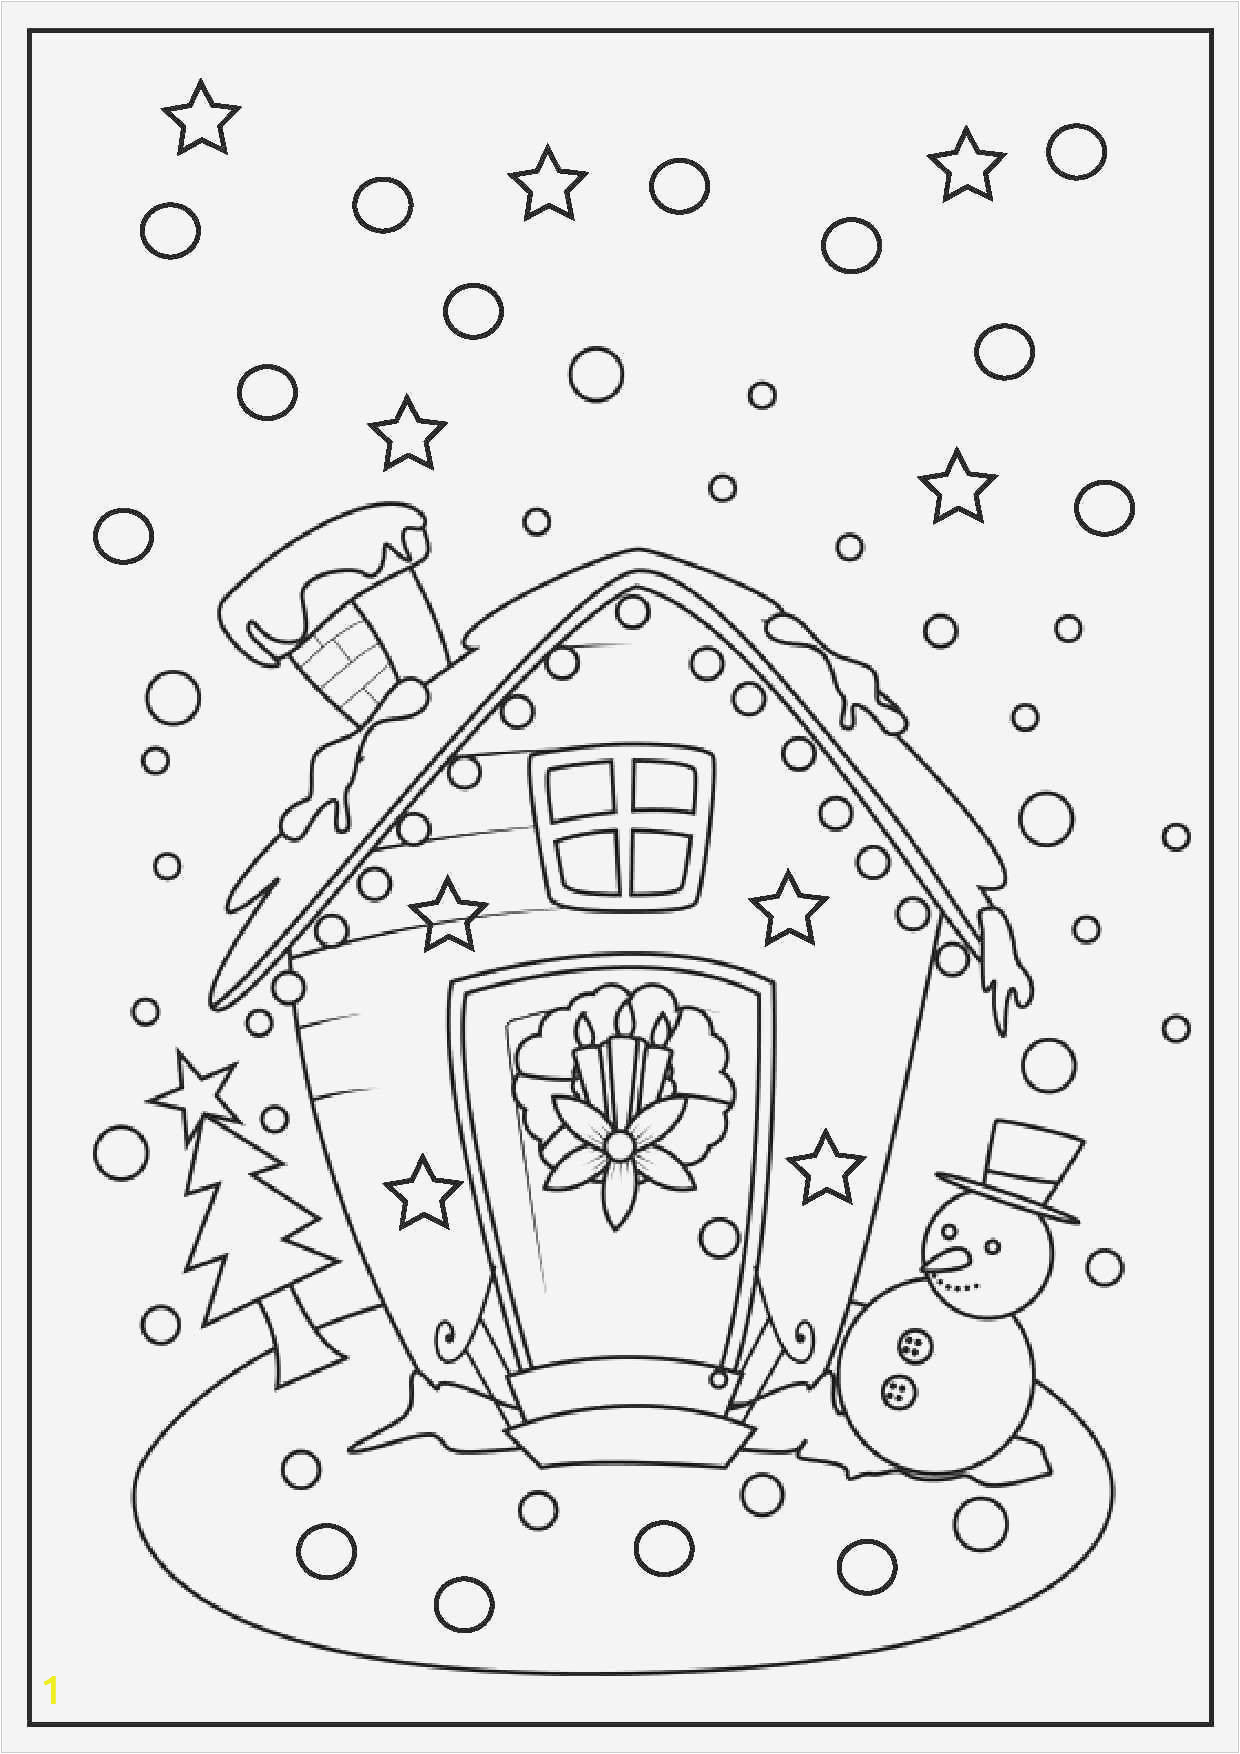 Coloring Pages for Halloween Printable Coloring by Numbers